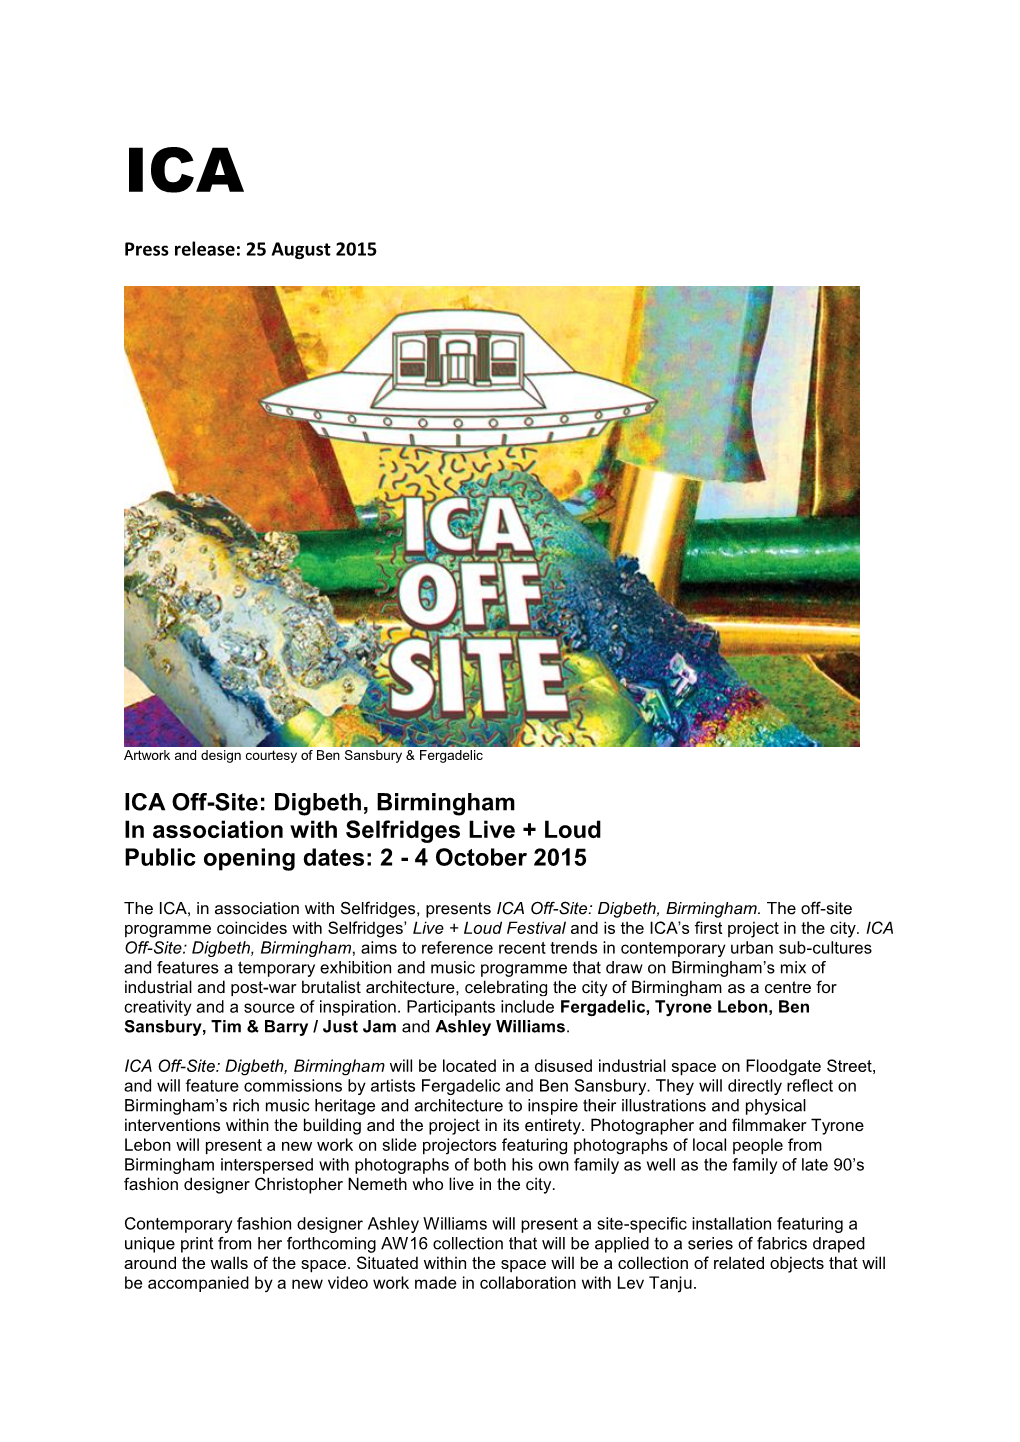 ICA Off-Site: Digbeth, Birmingham in Association with Selfridges Live + Loud Public Opening Dates: 2 - 4 October 2015